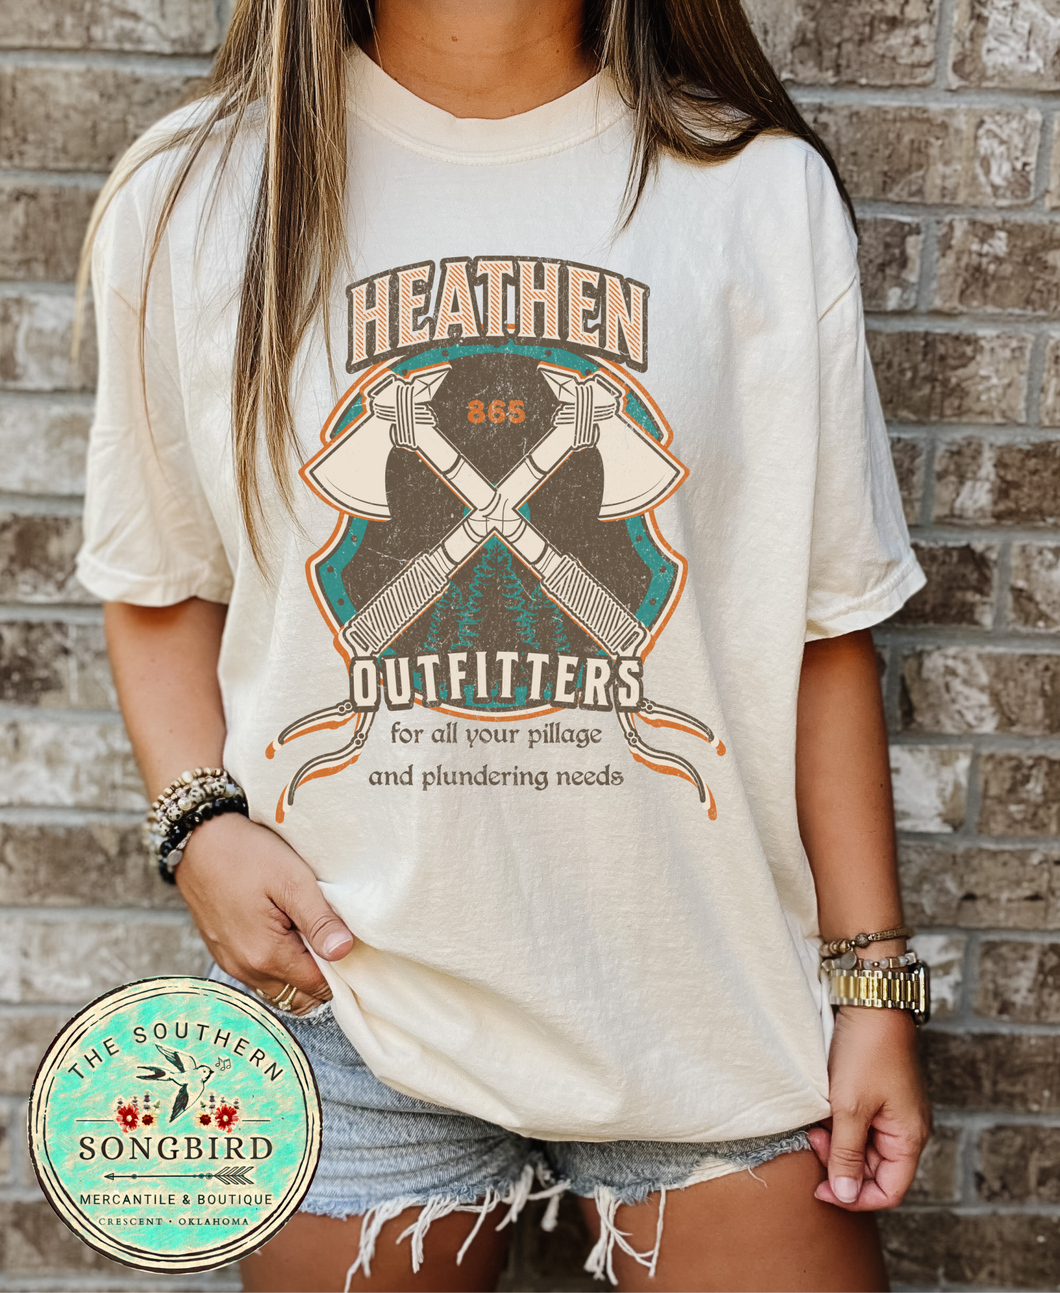 SALE!! Ready To Ship!! Heathen Outfitters Graphic T-shirt